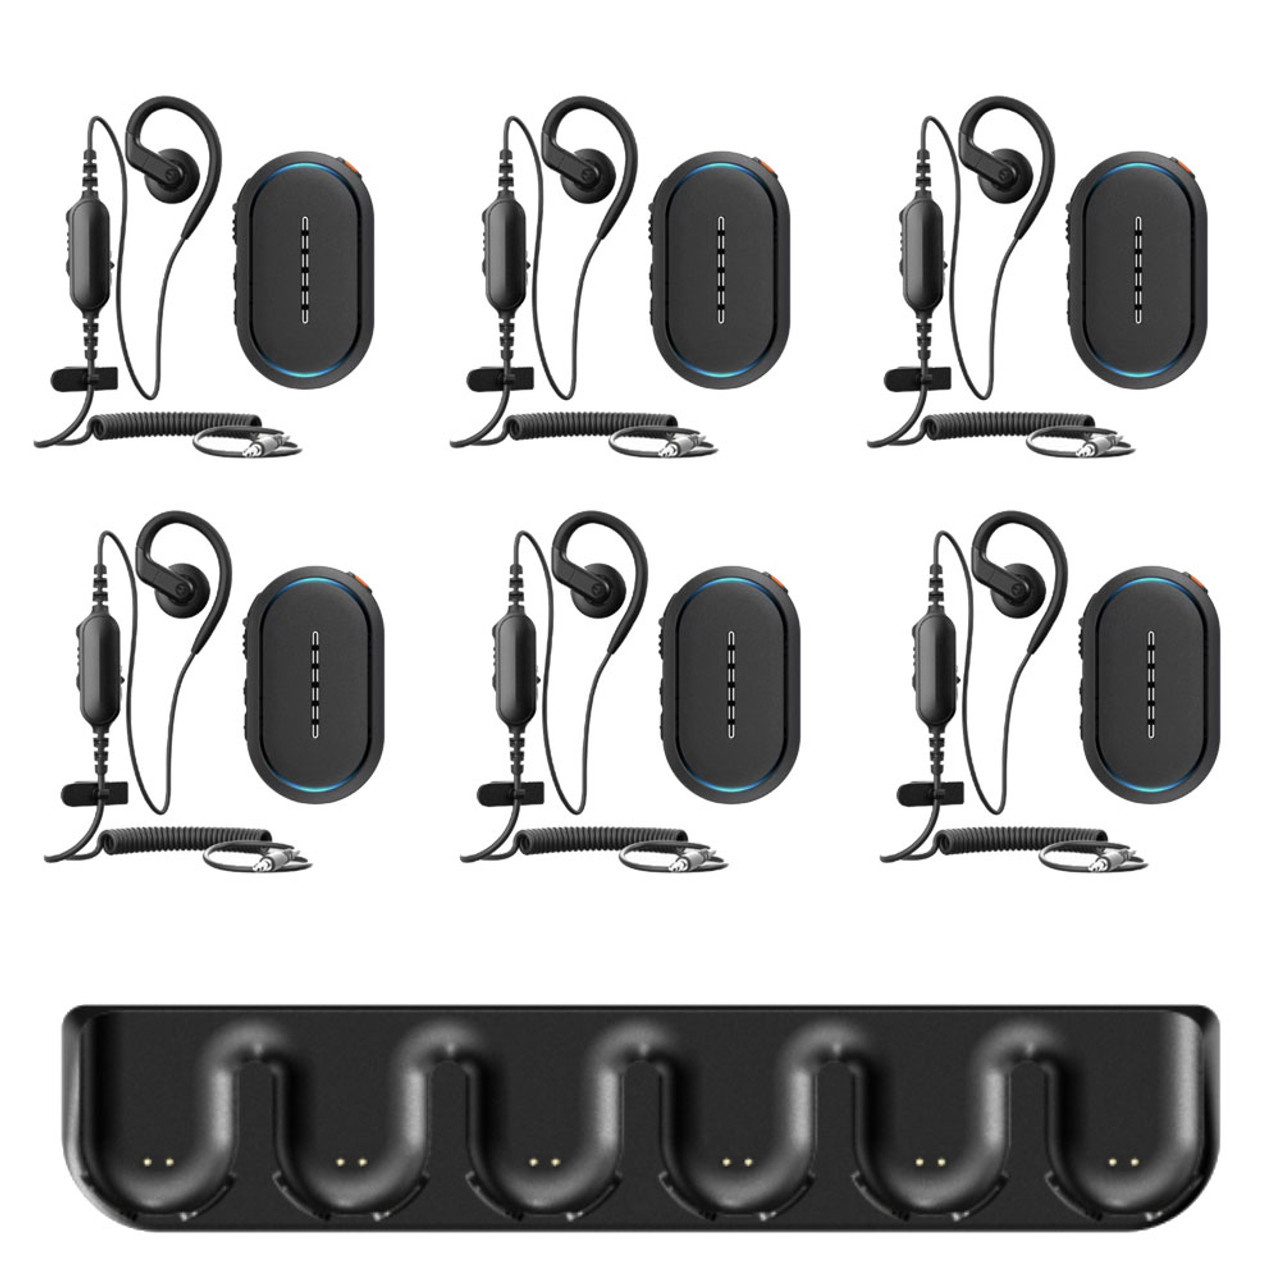 Motorola TLK25 WiFi wearable communication device with headset 6 Pack with Multi-Charger